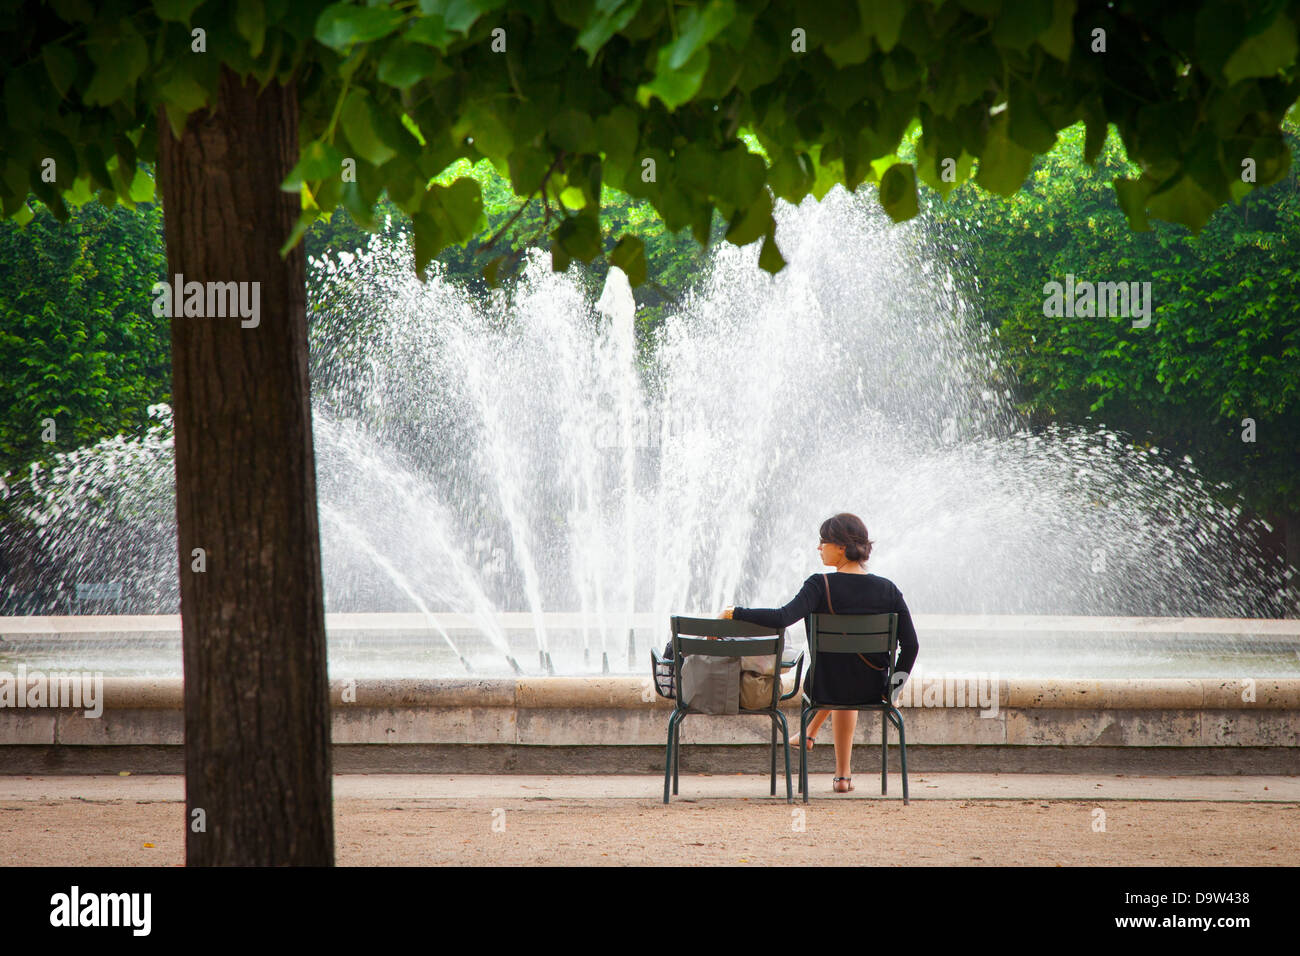 Woman relaxing at the fountain in the Garden of Palais Royal, Paris France Stock Photo